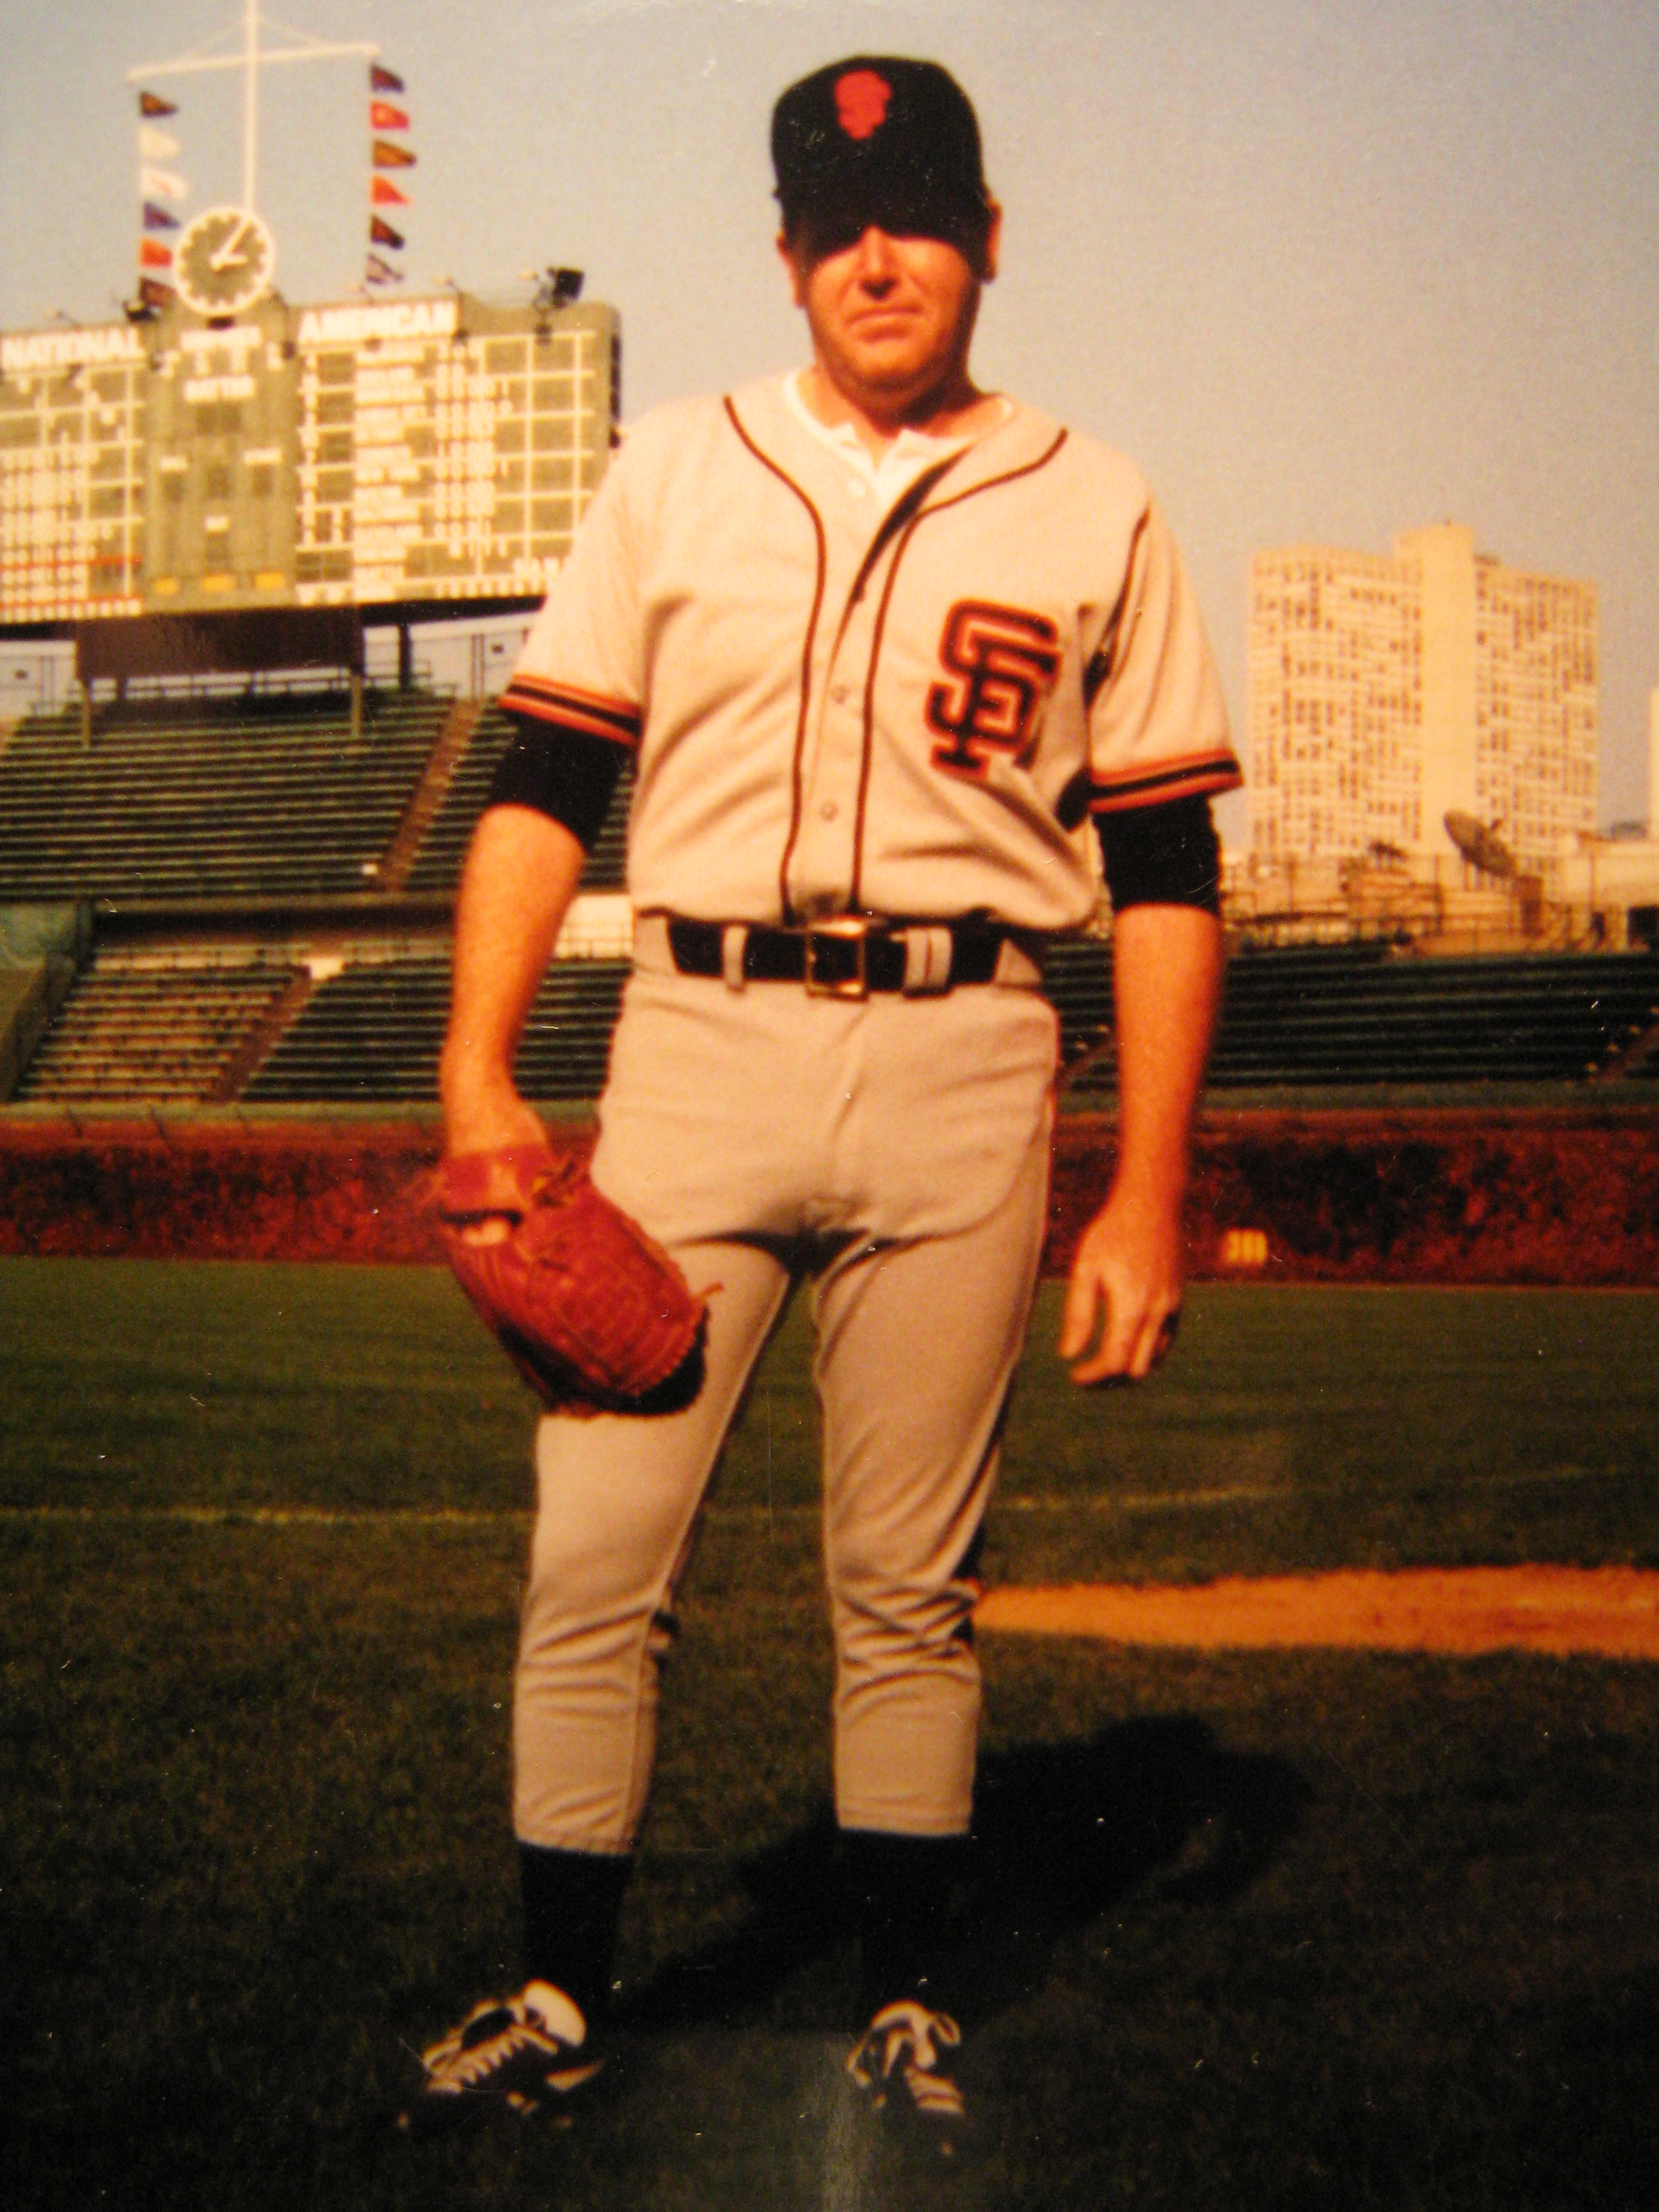 Ready to play ball at Wrigley Field for the film, ROOKIE OF THE YEAR. (1993) ~ Congratulations to the 2012 World Champion San Francisco Giants!